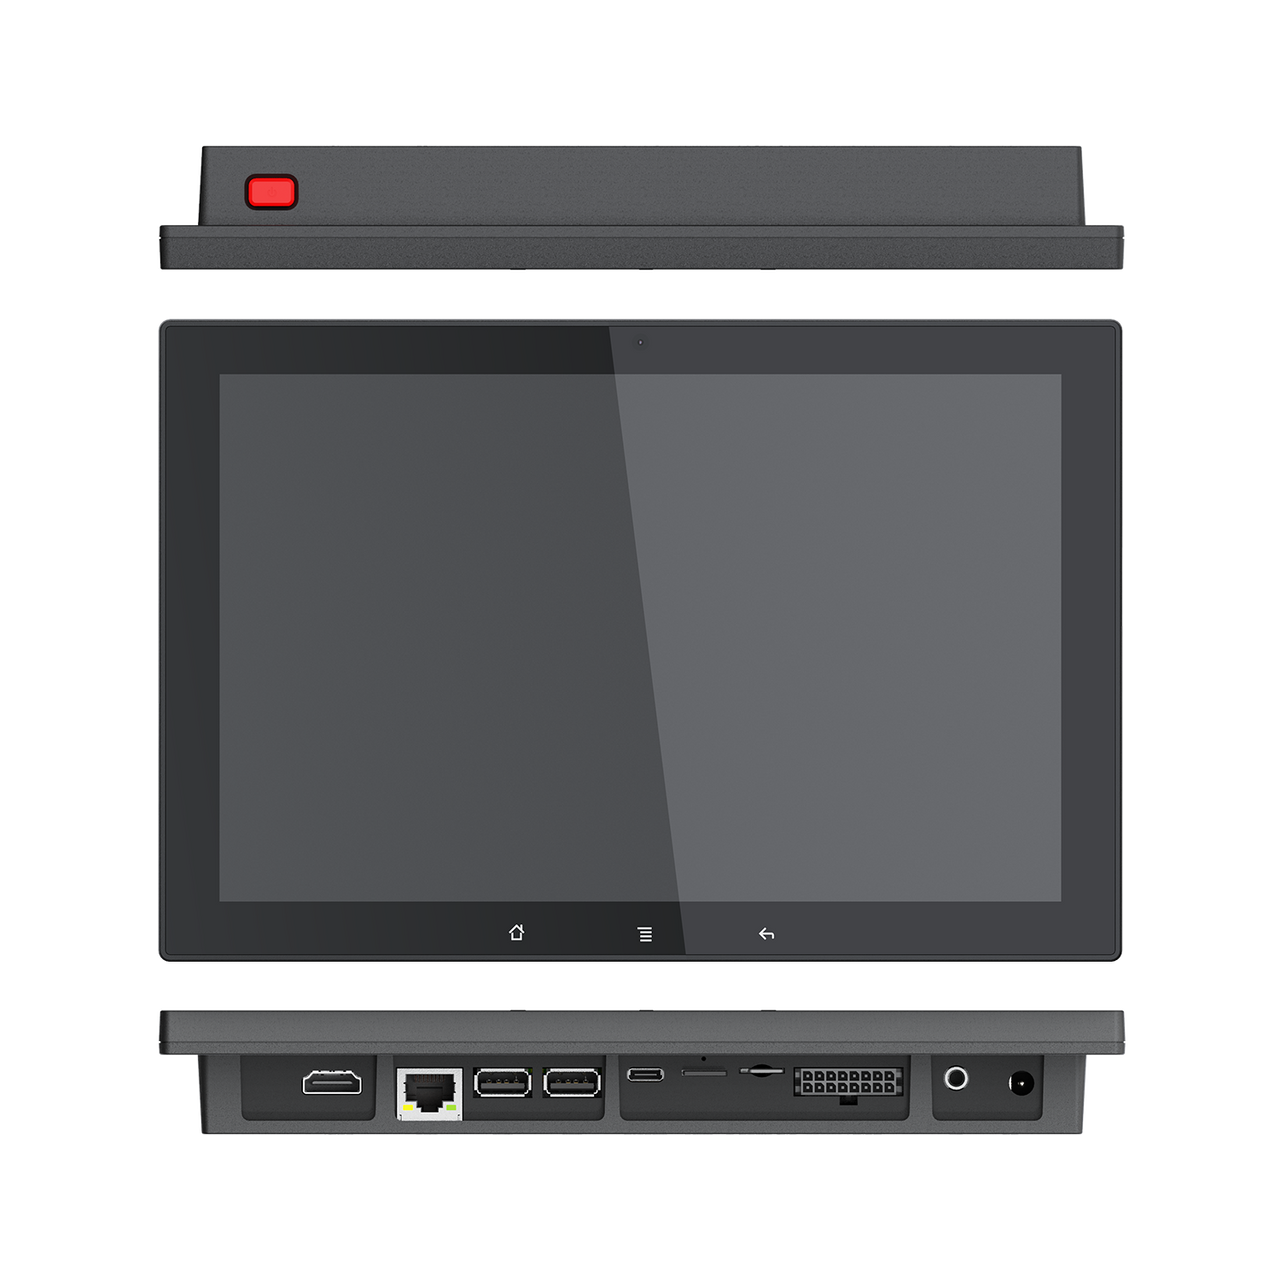 PC-1010R 10.1" Android 10.0 Panel PC WITH ROCKCHIP PROCESSOR